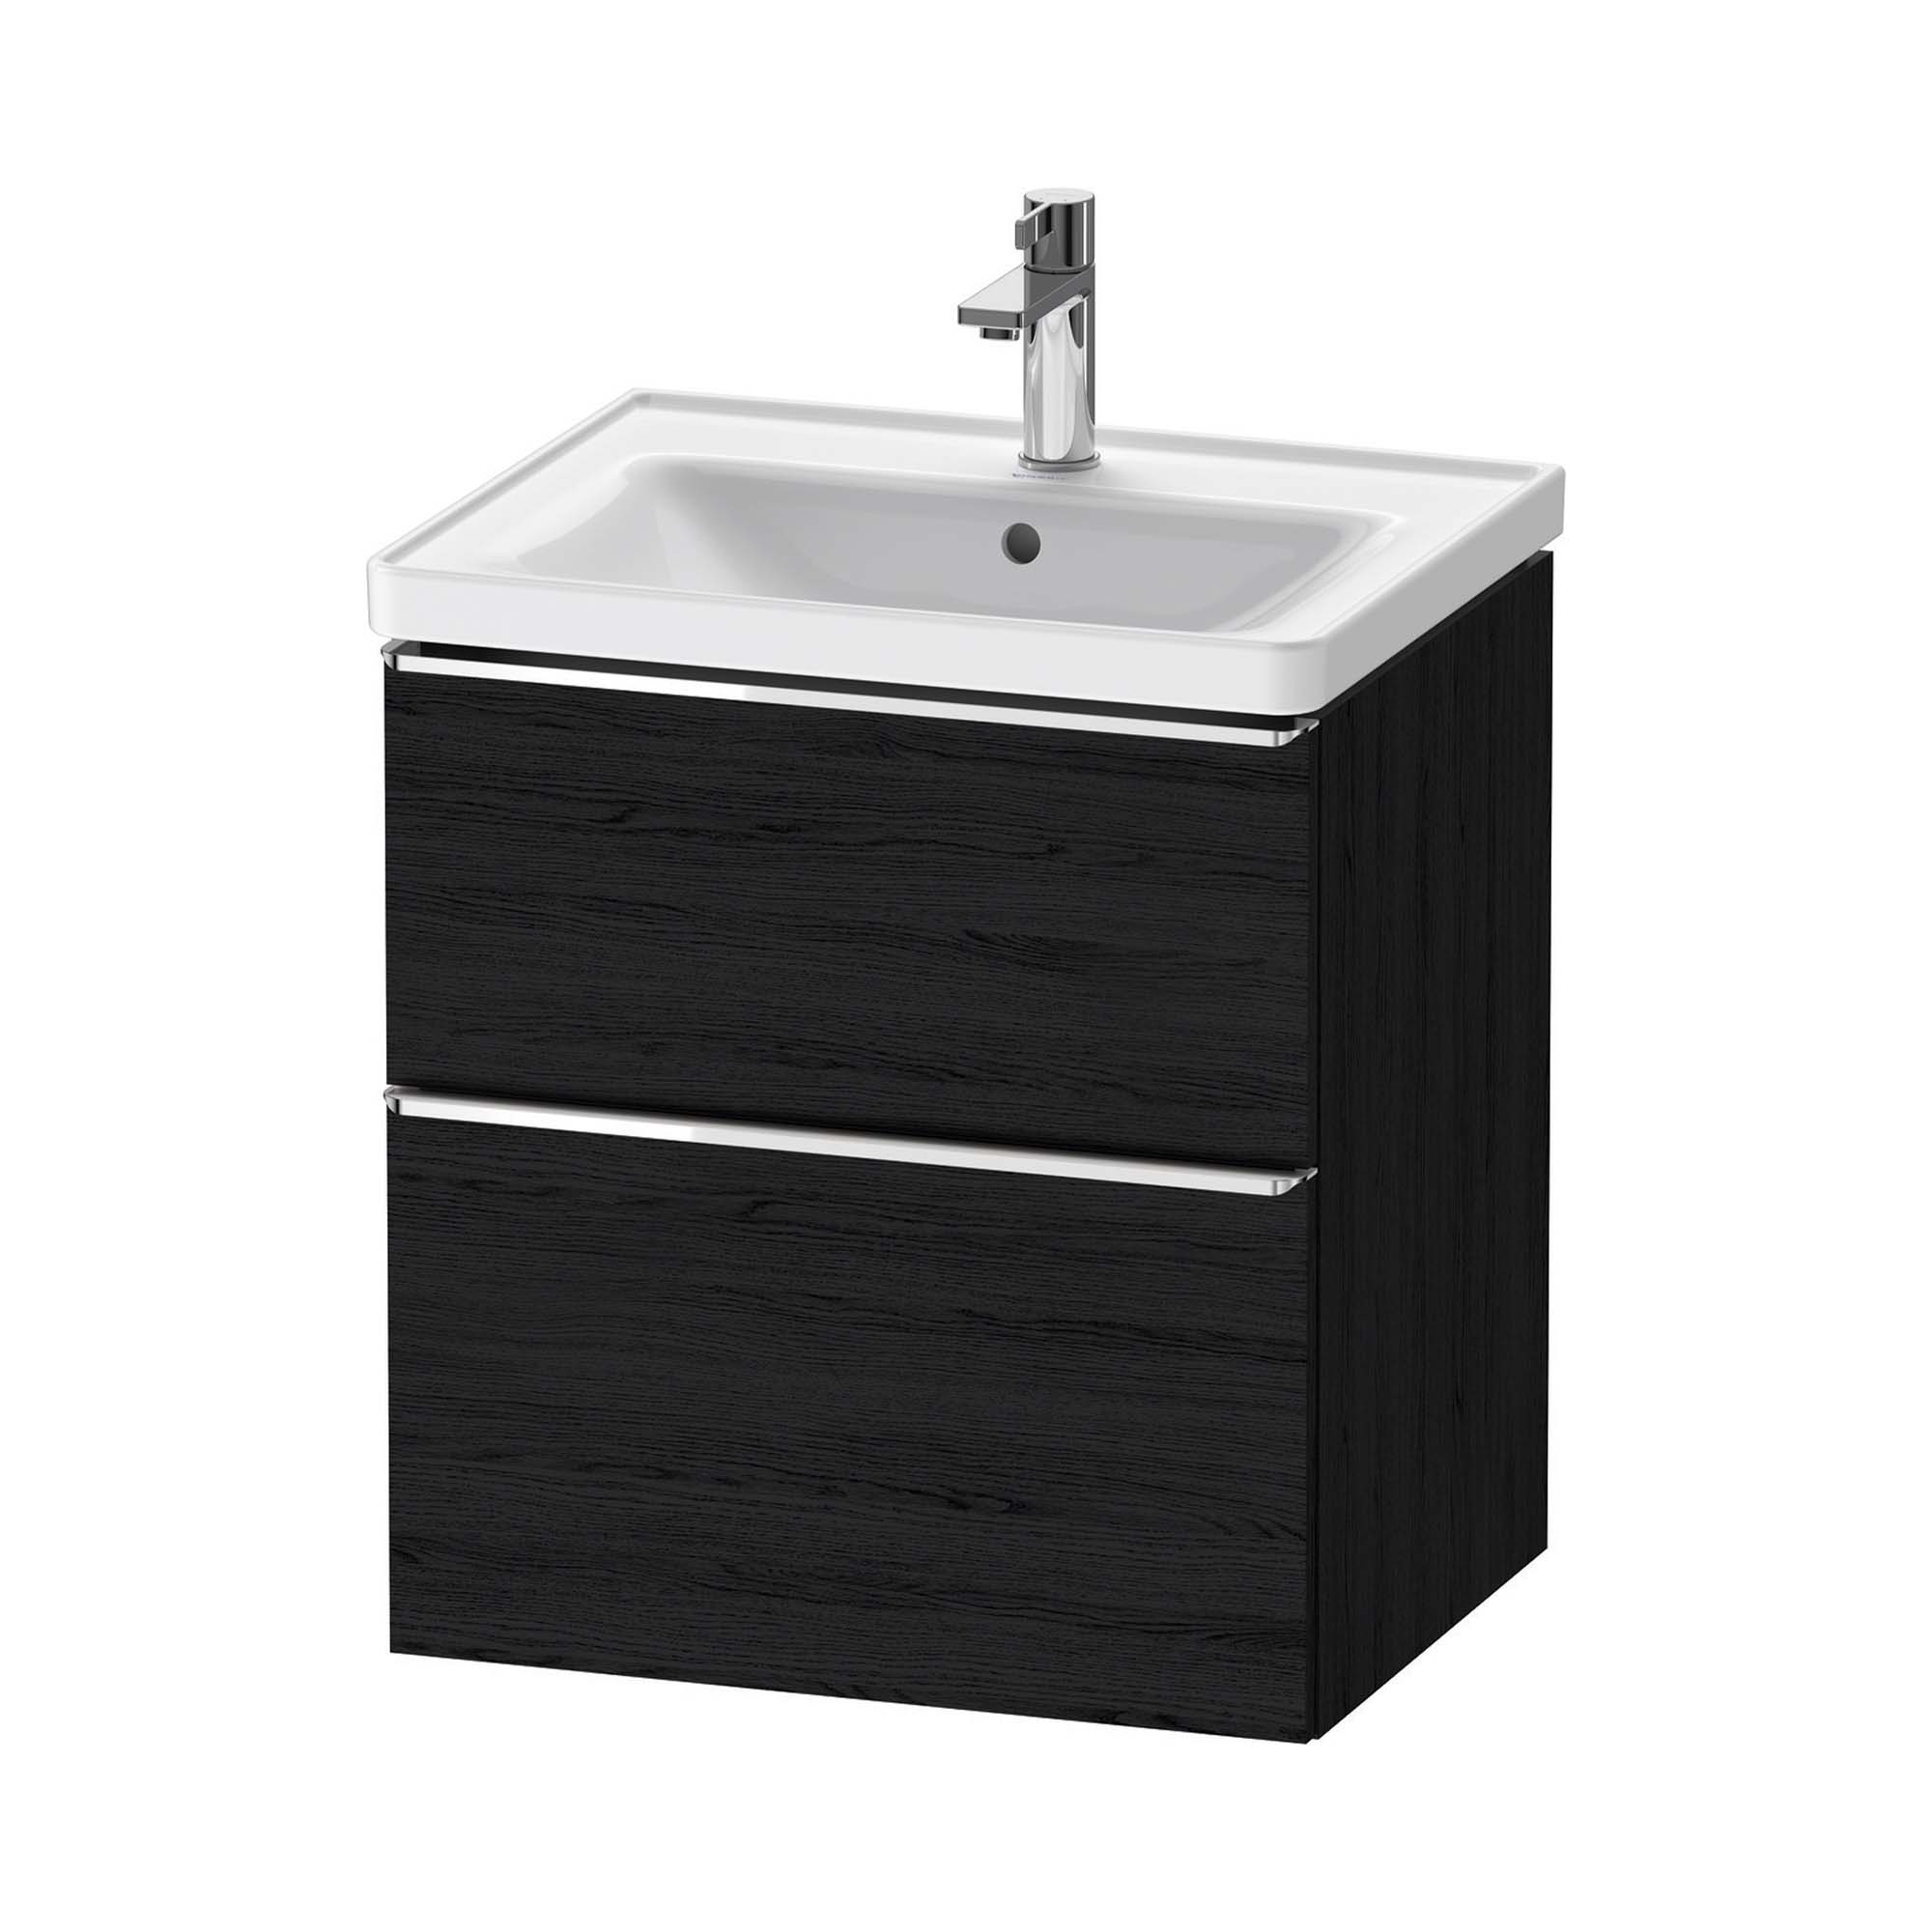 duravit d-neo 600 wall mounted vanity unit with d-neo basin black oak chrome handles